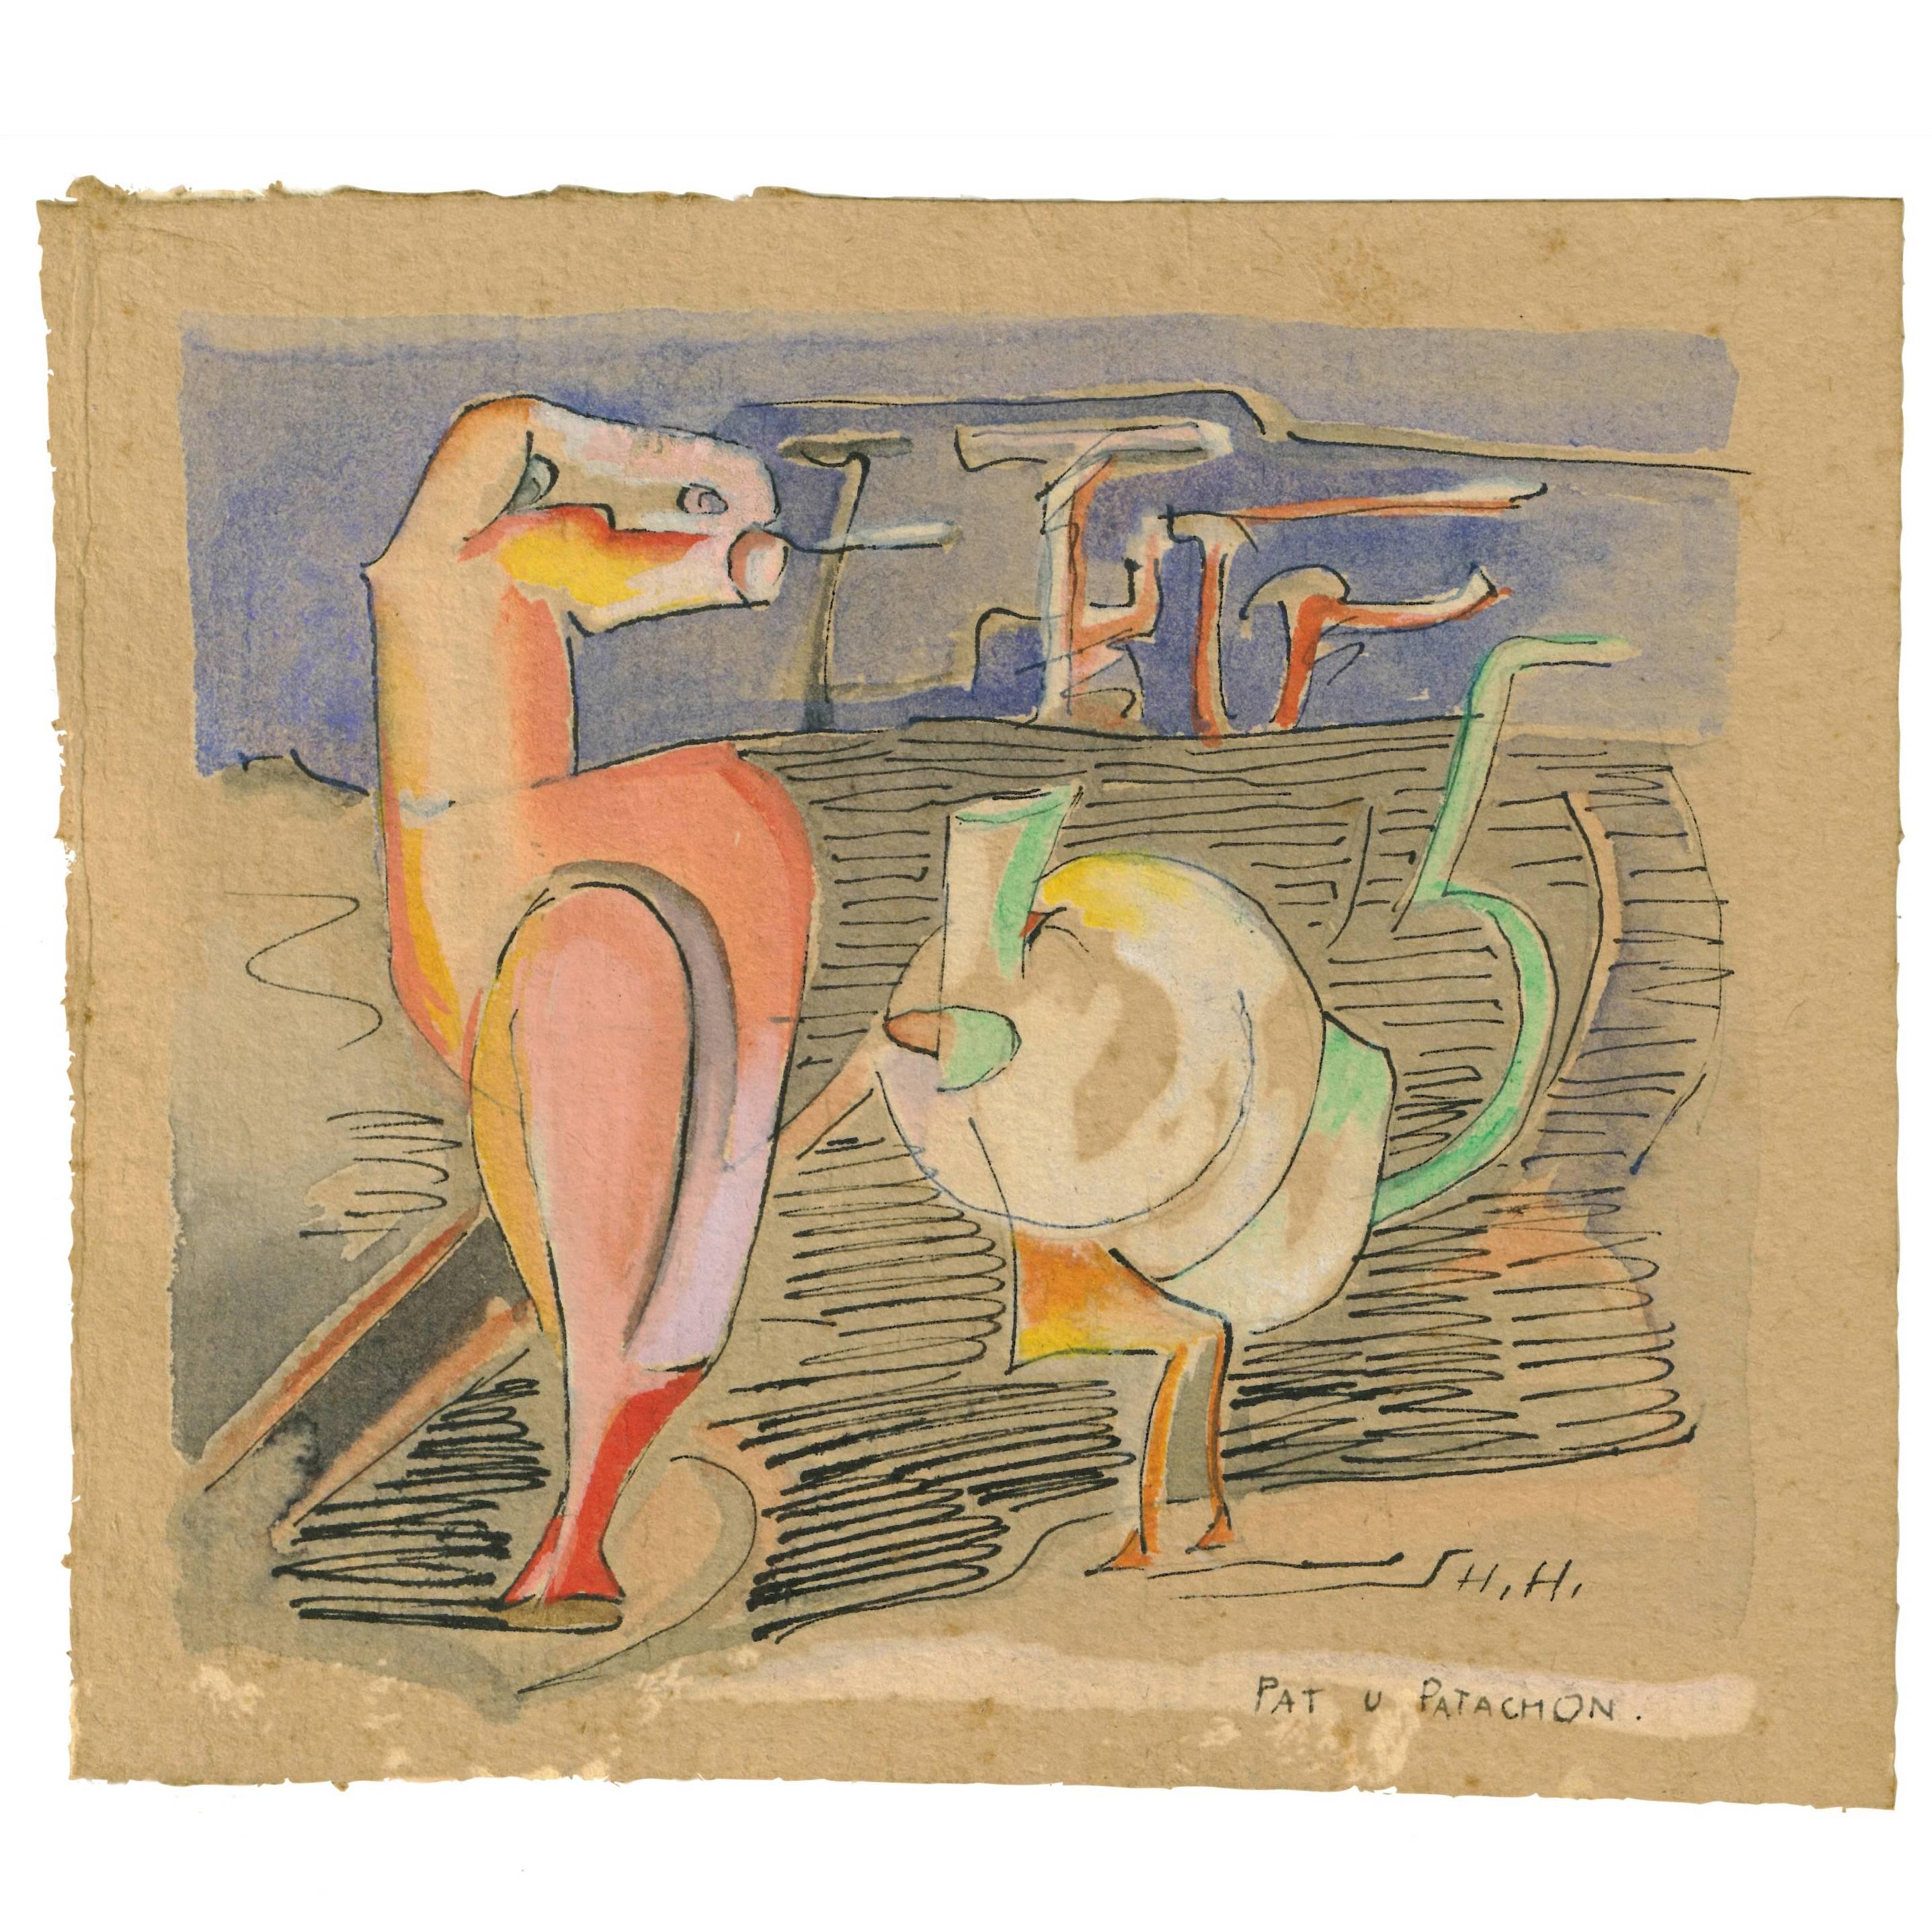 Hannah Höch, 'Pat u Patachon', Watercolor with Ink on Paper, 1920s For Sale